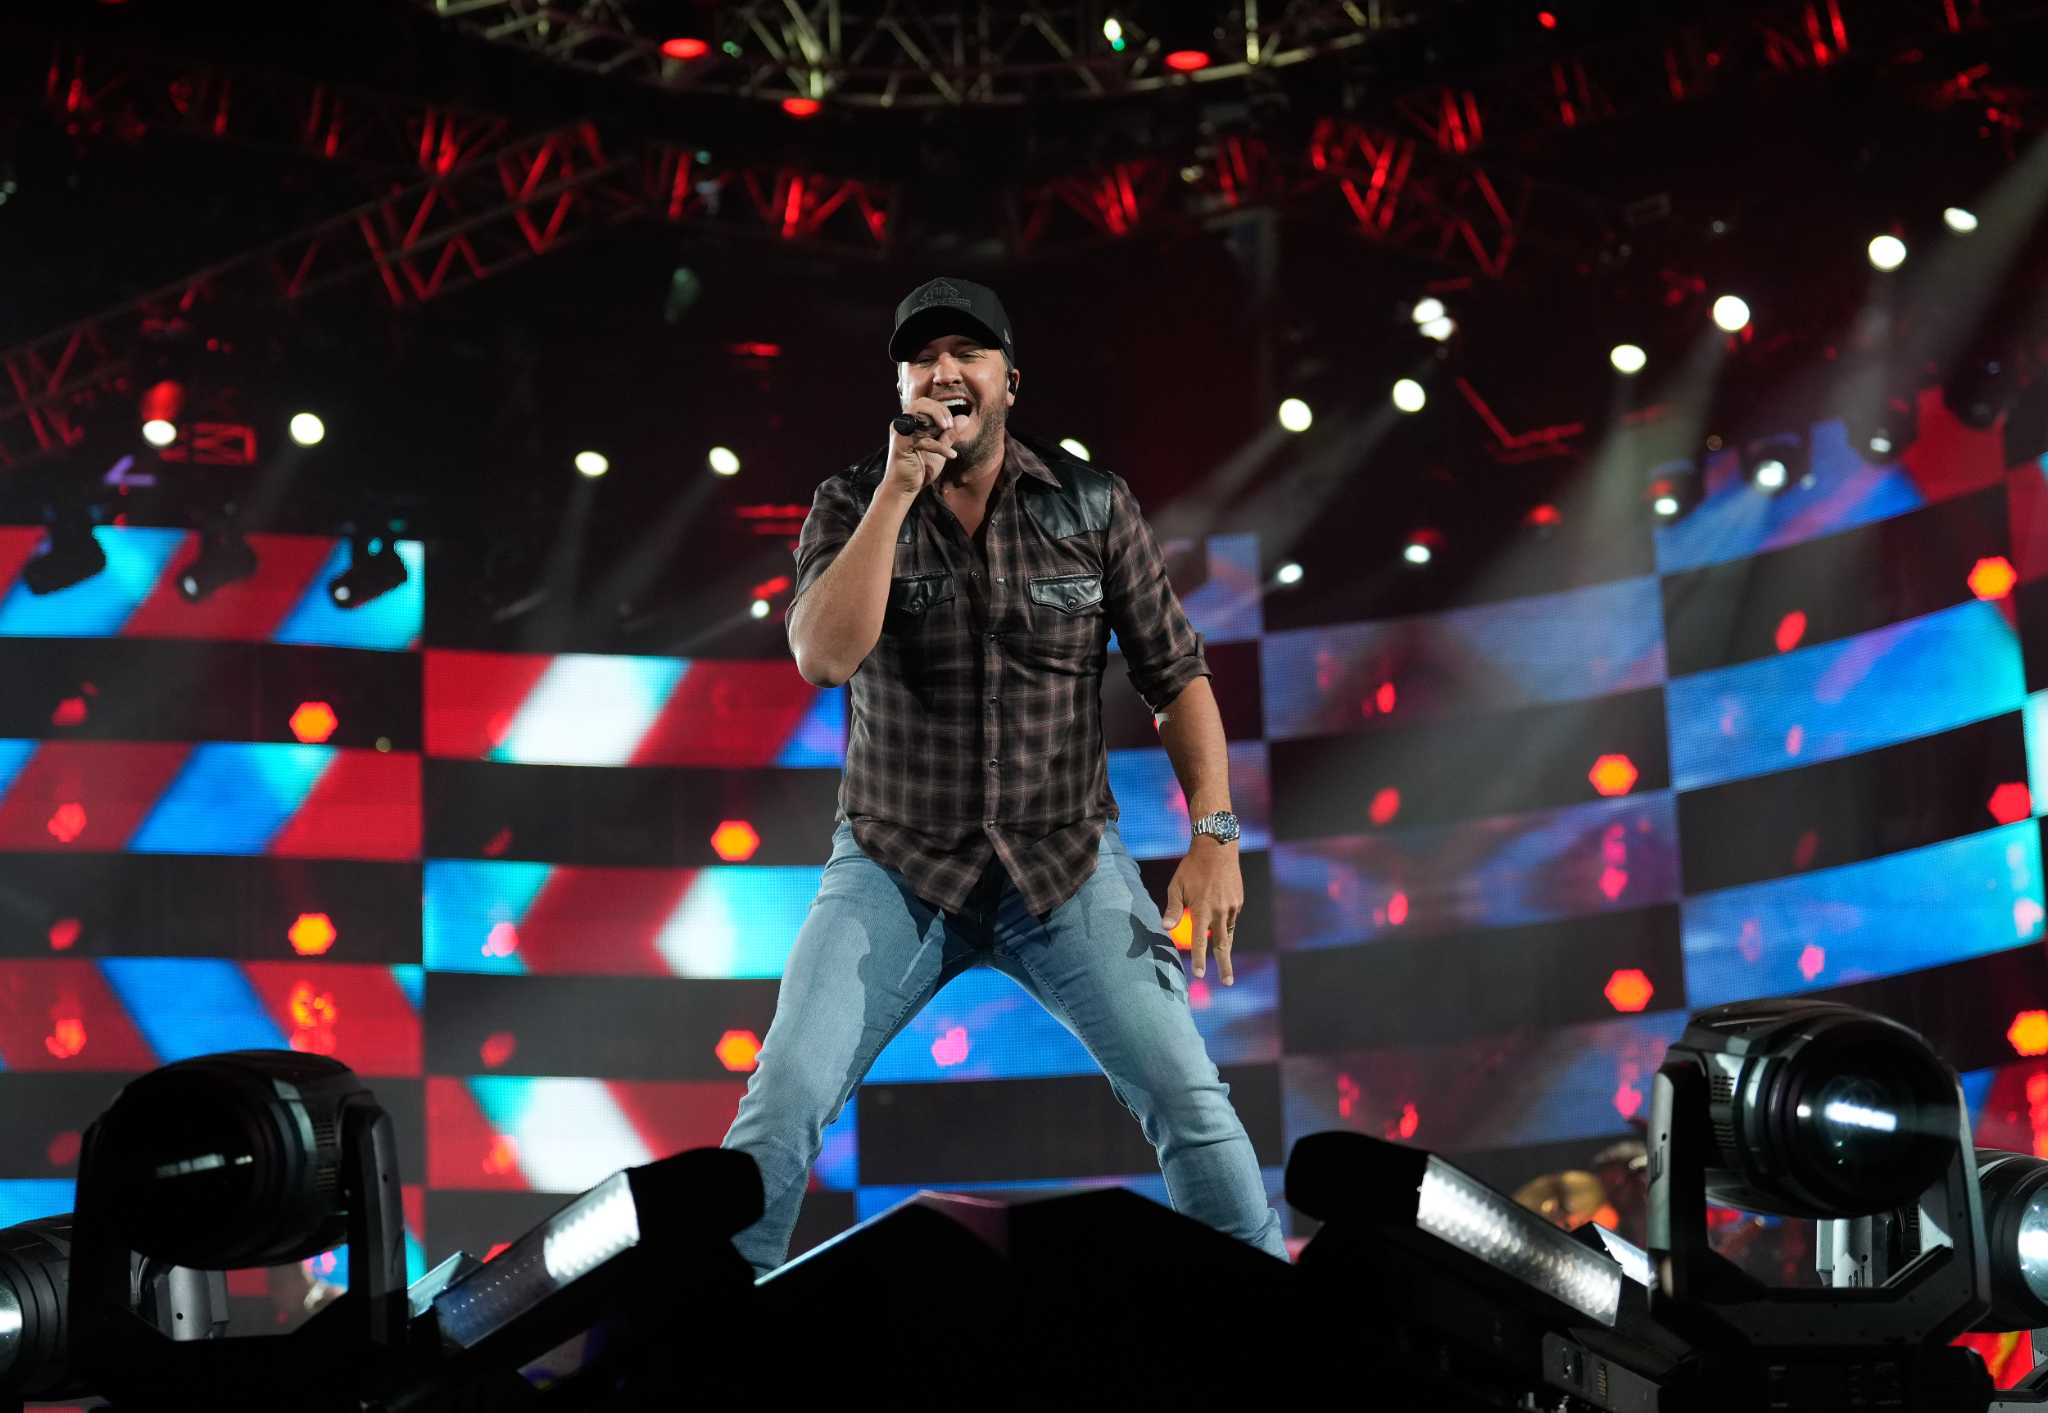 Luke Bryan at Houston Rodeo Closing out with the biggest crowd of the